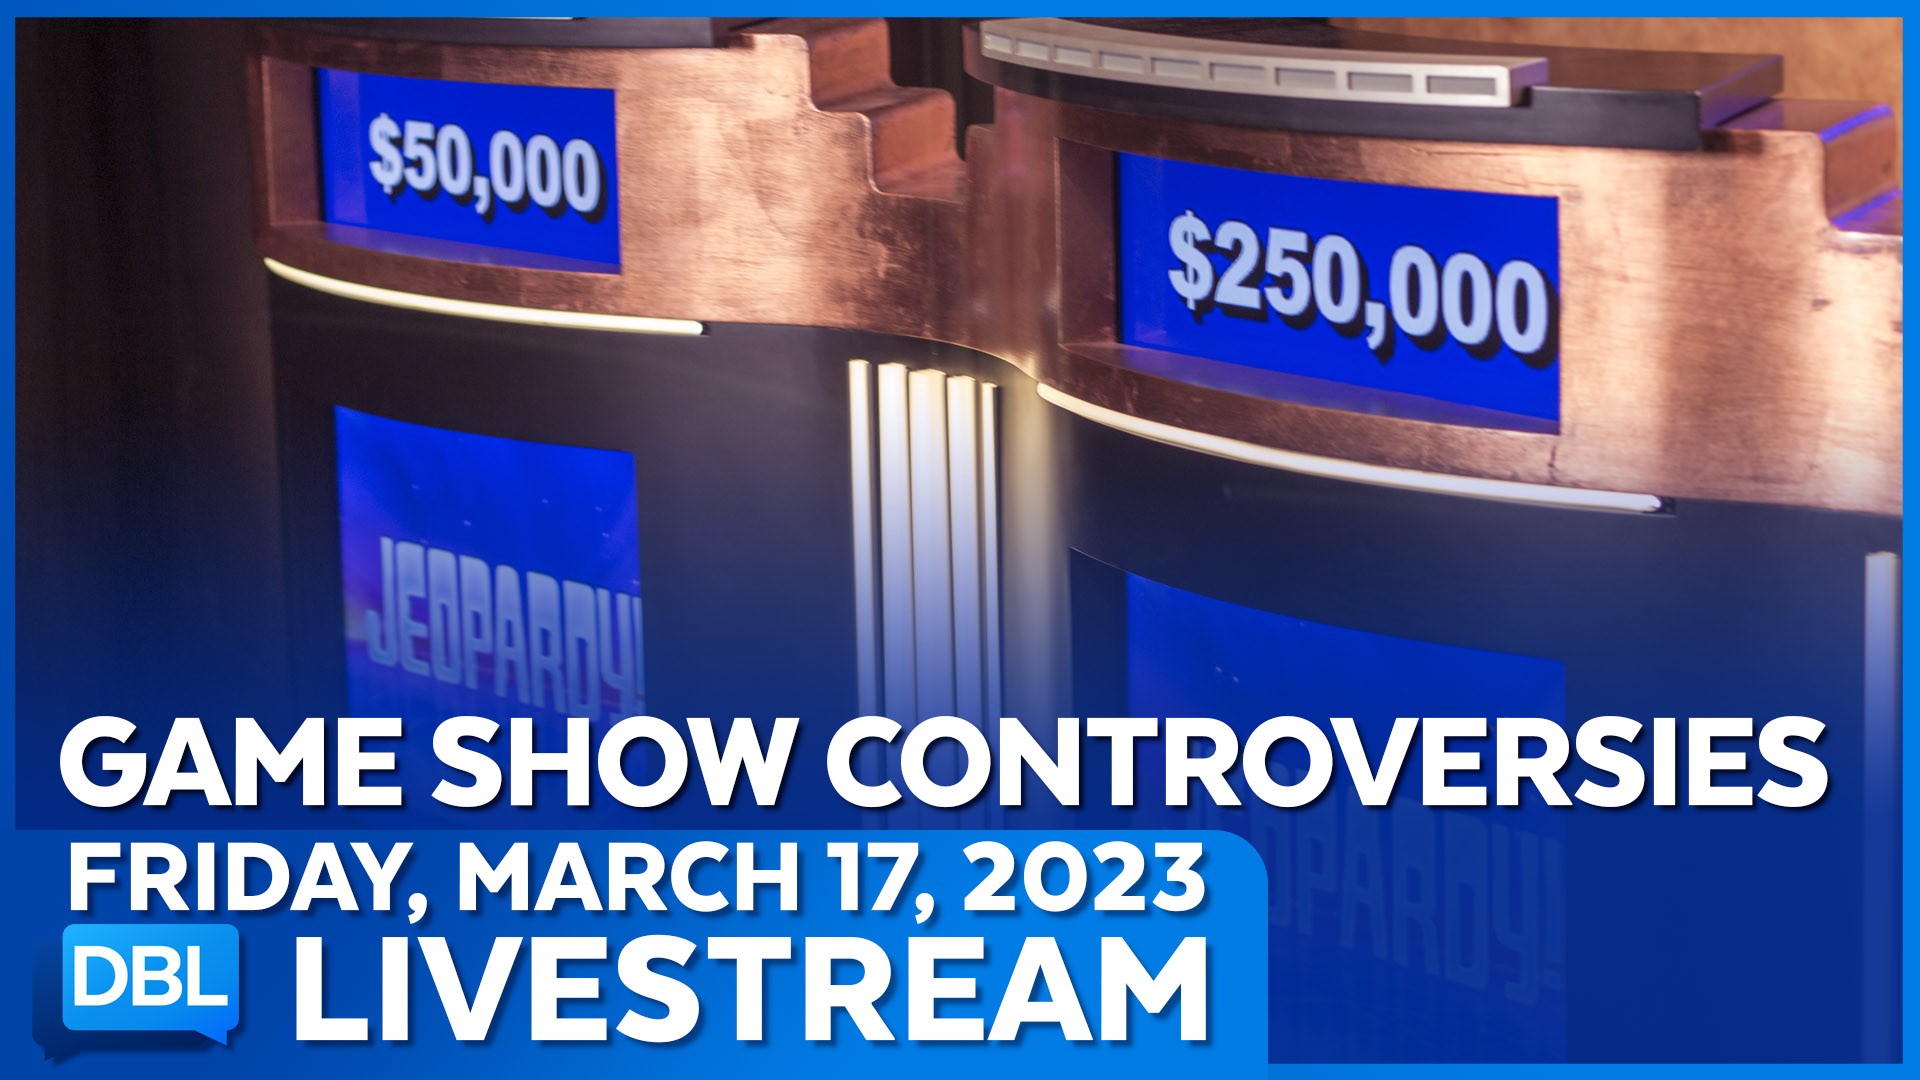 Happy St. Patrick's Day! Game show controversies; A former teacher scammed of her life savings gets help from DBL viewers; Actress Yvette Nicole Brown joins!